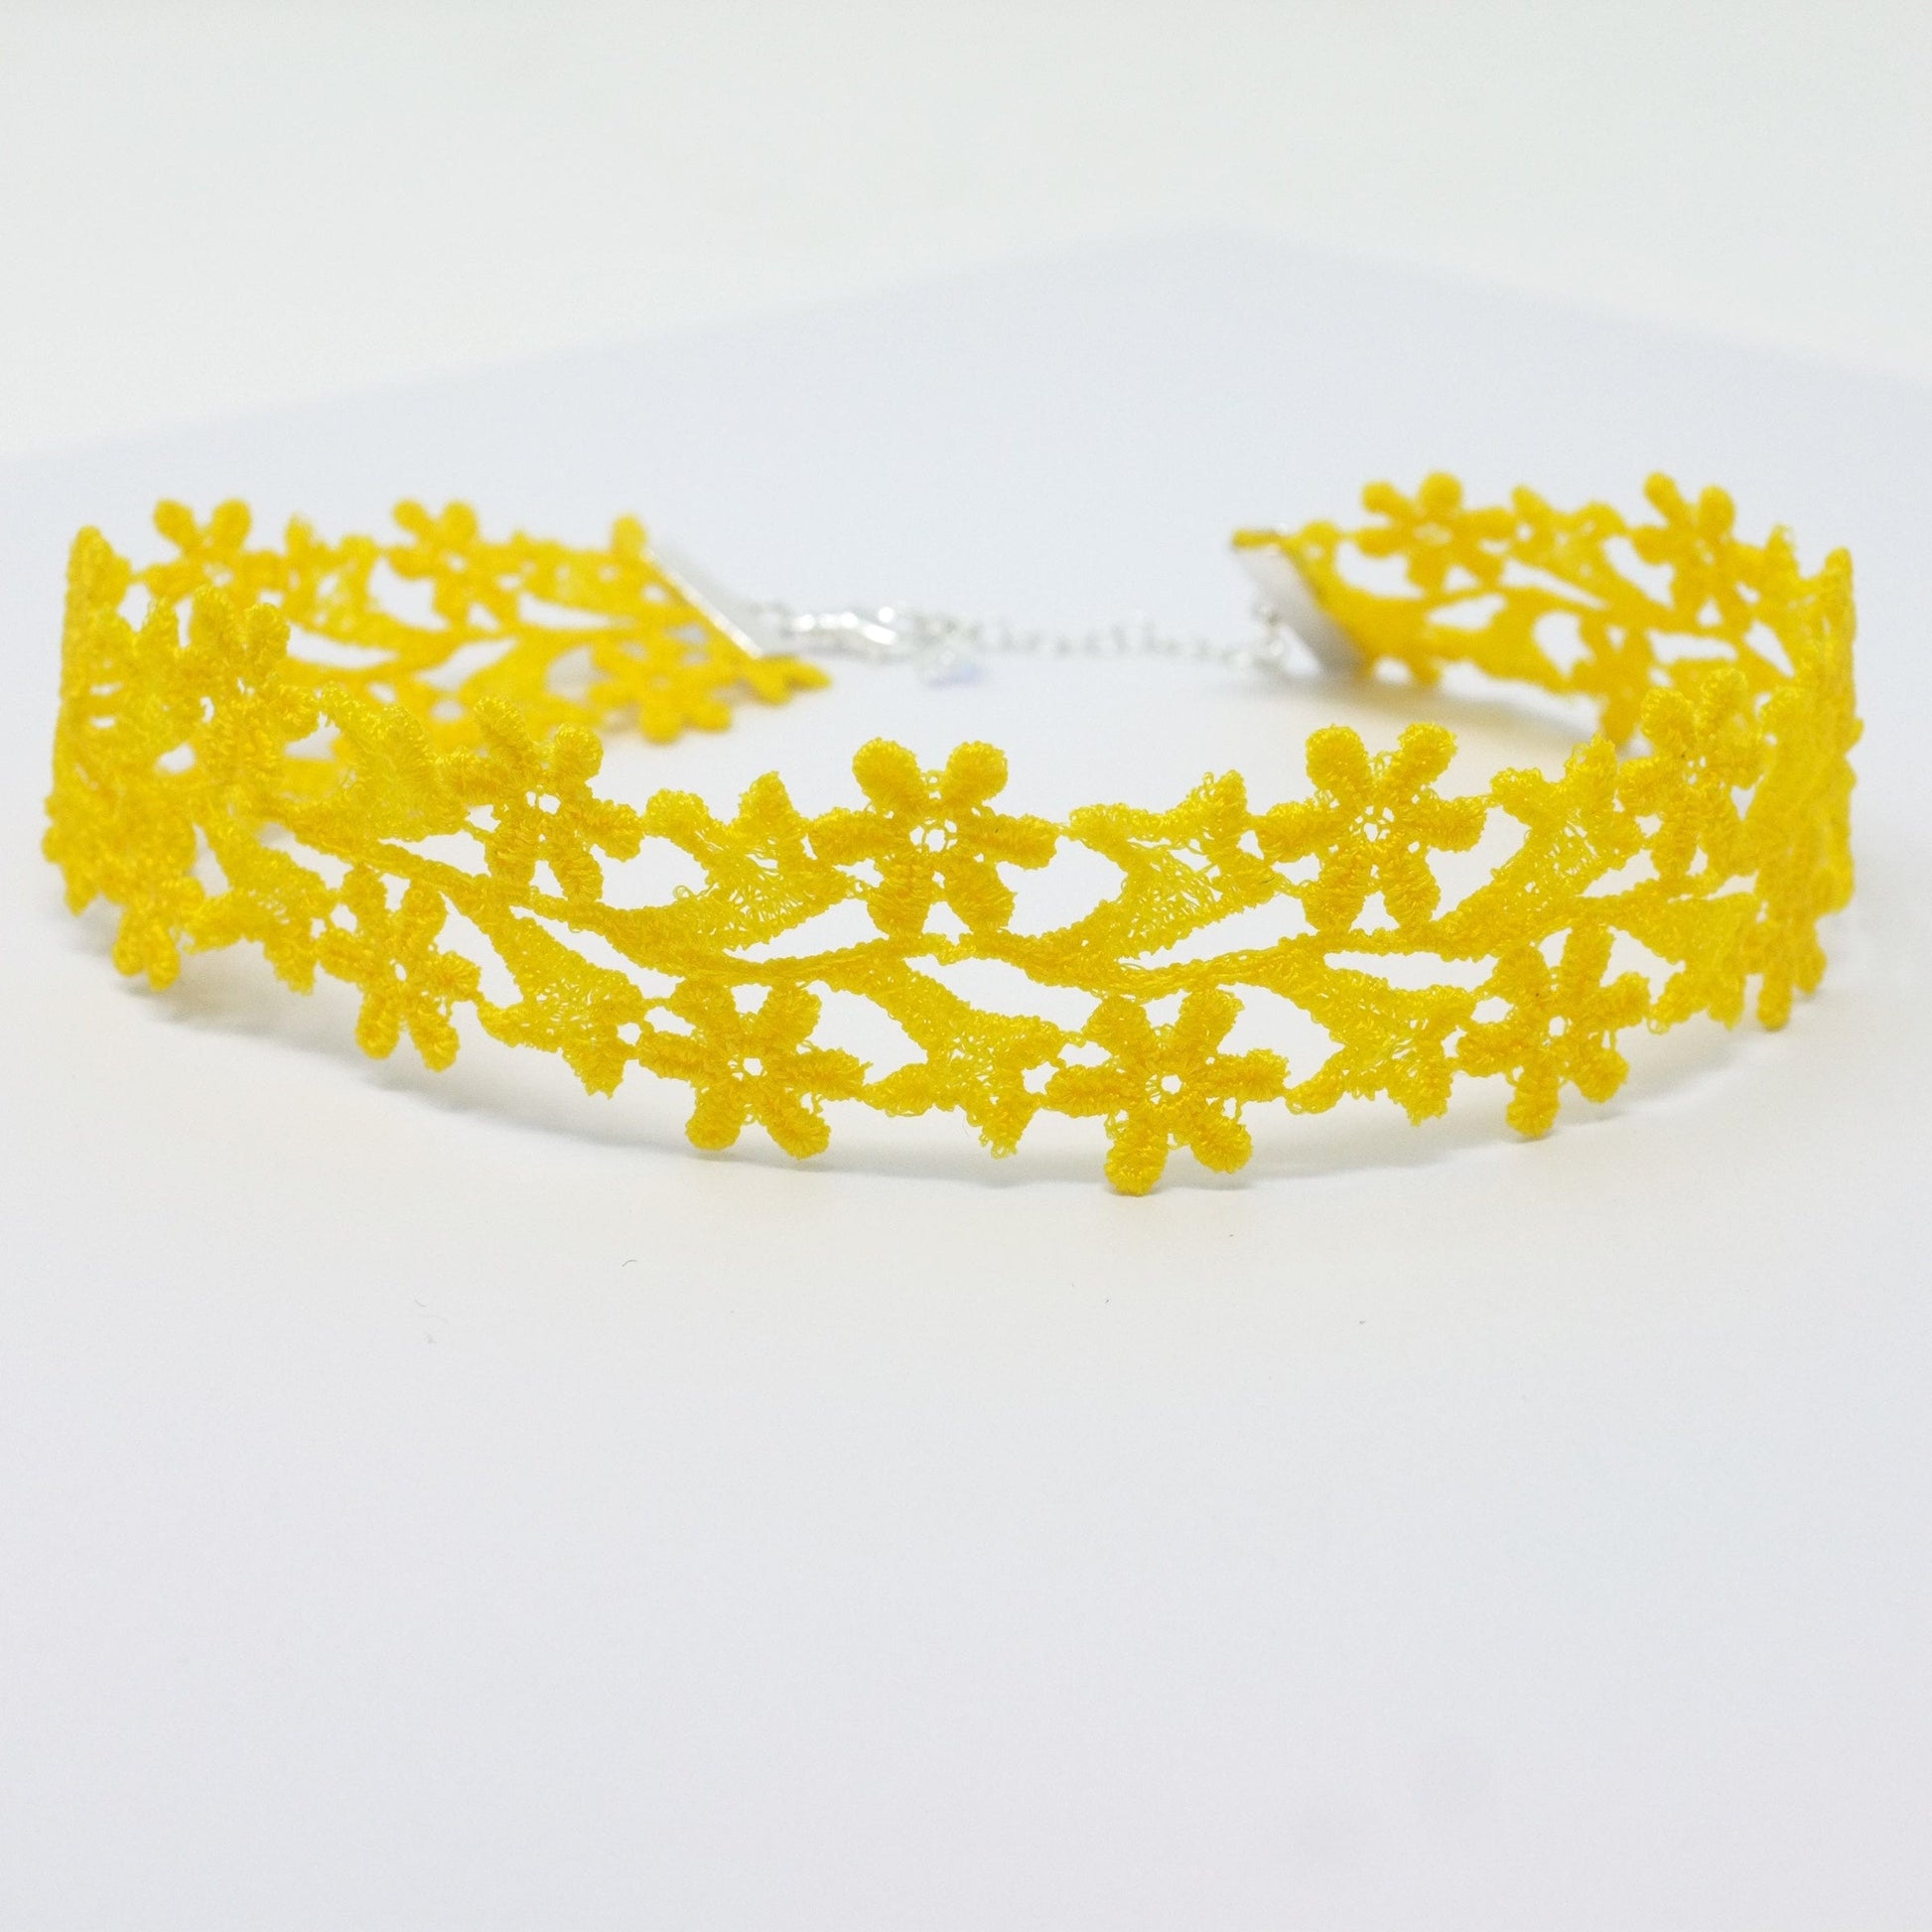 1 inch wide choker with yellow flowers